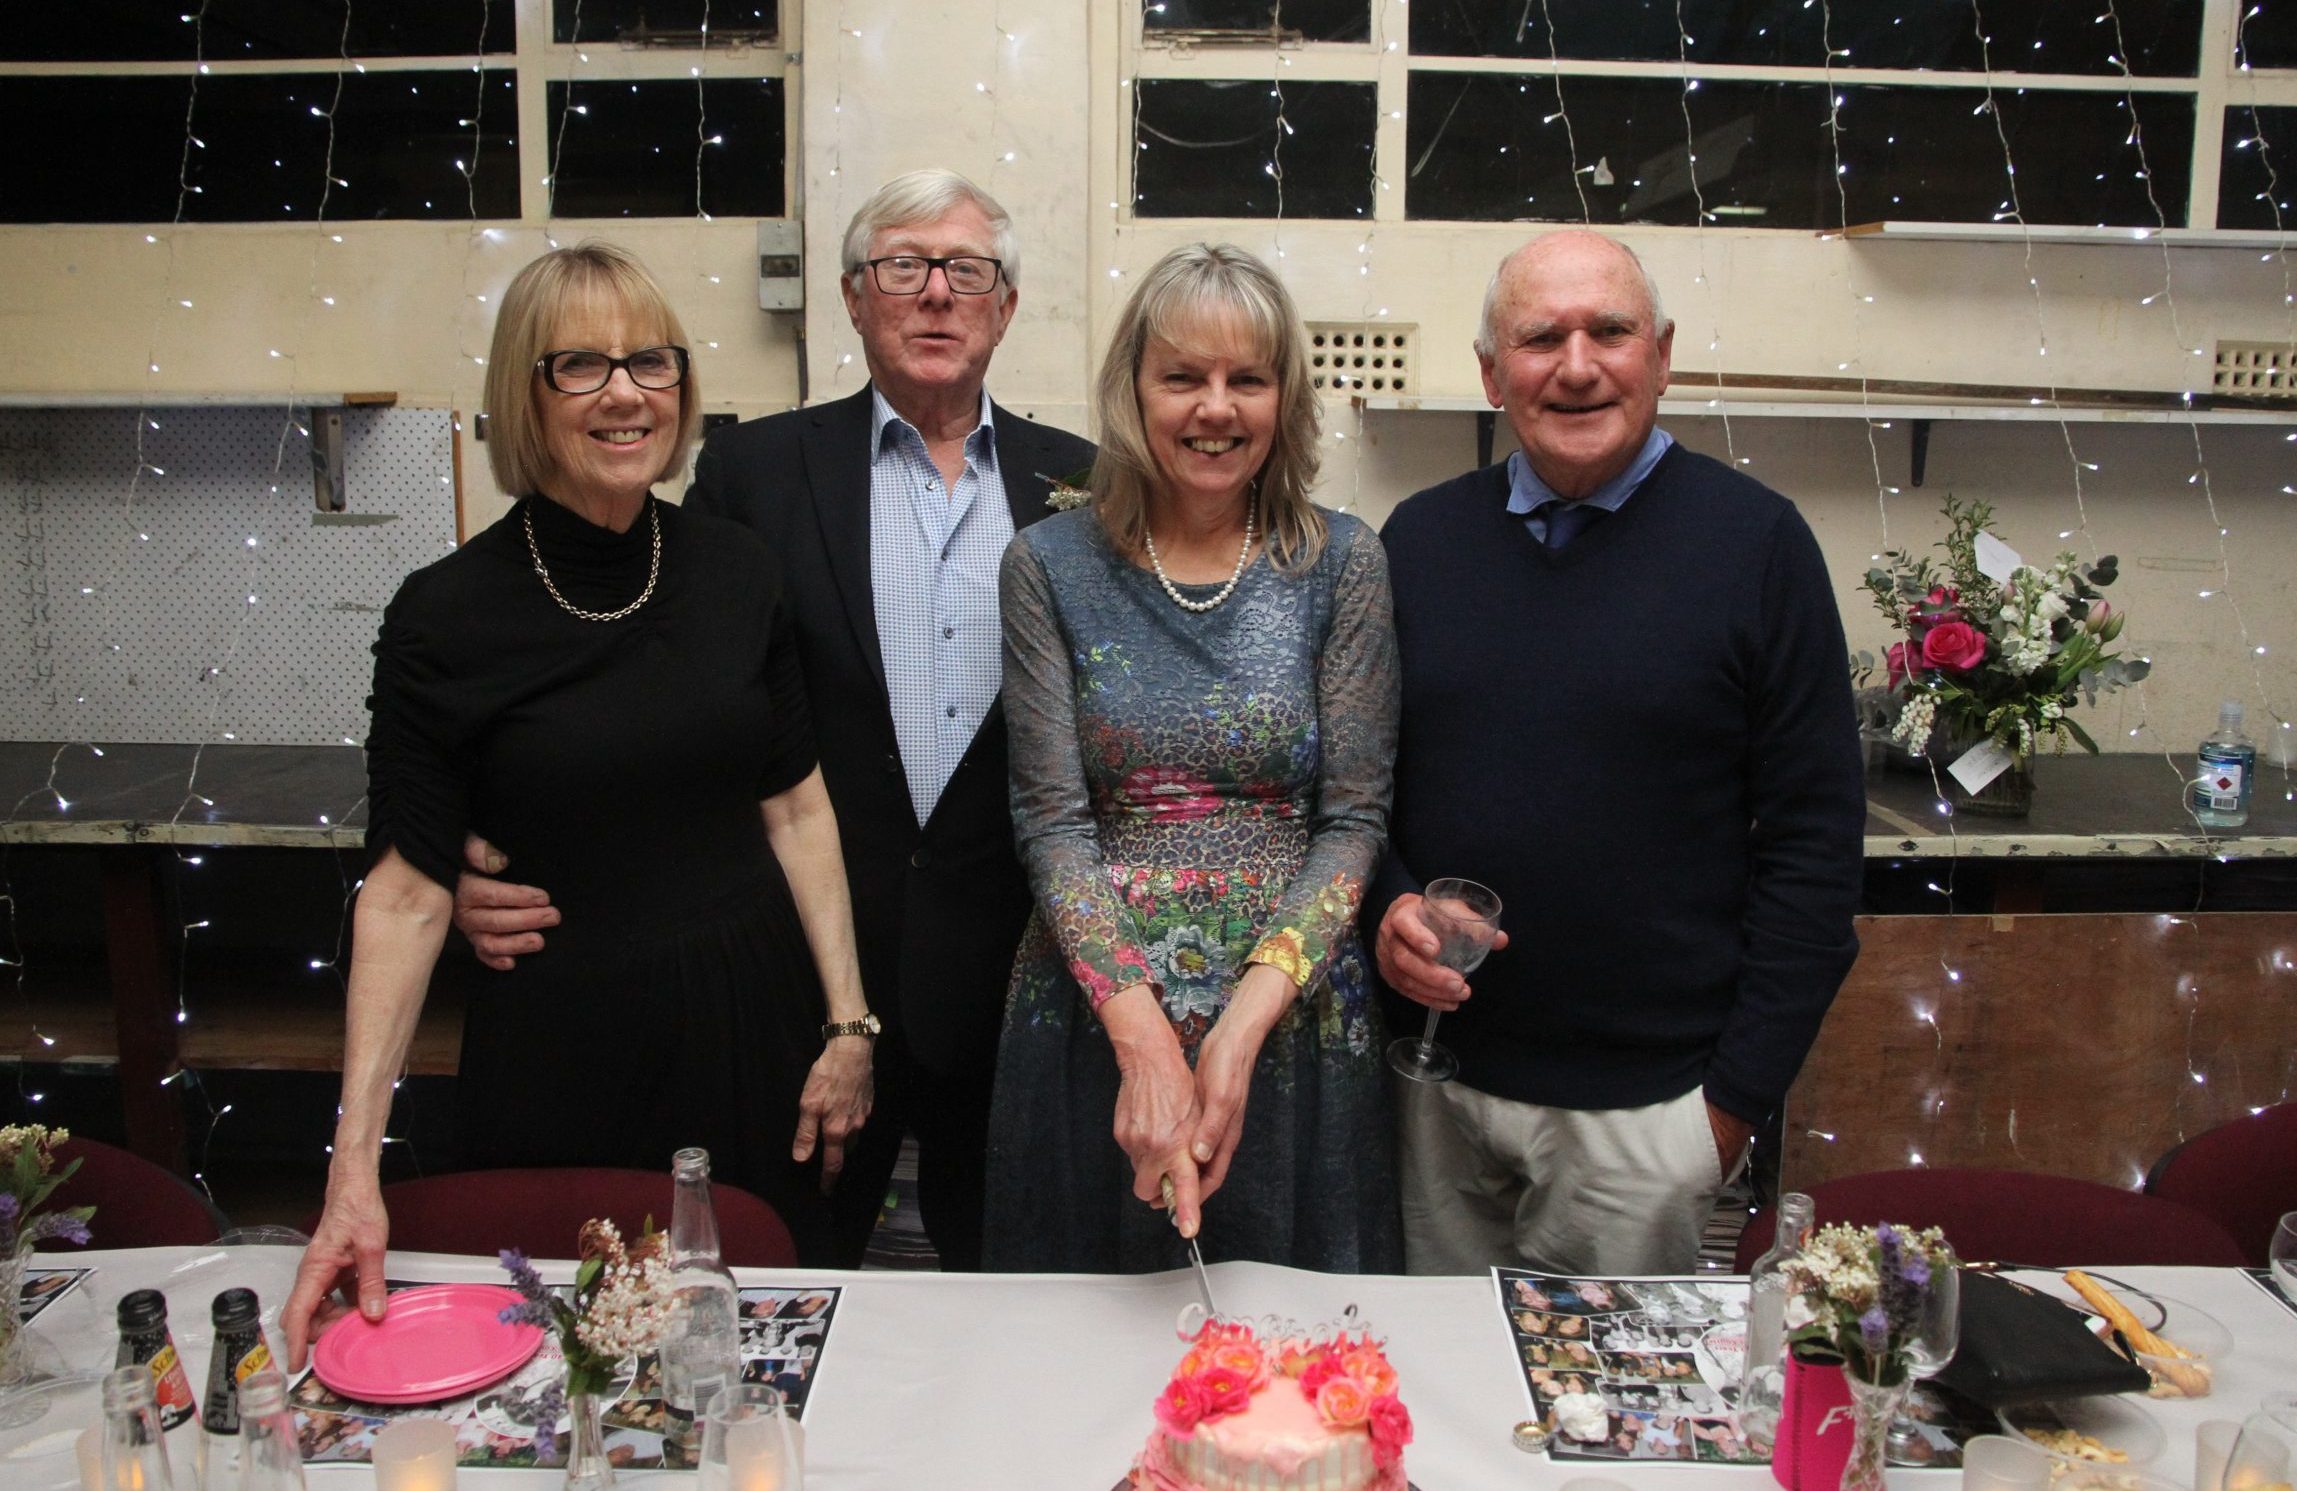 Key Courier staff member’s 40th year of service celebrated